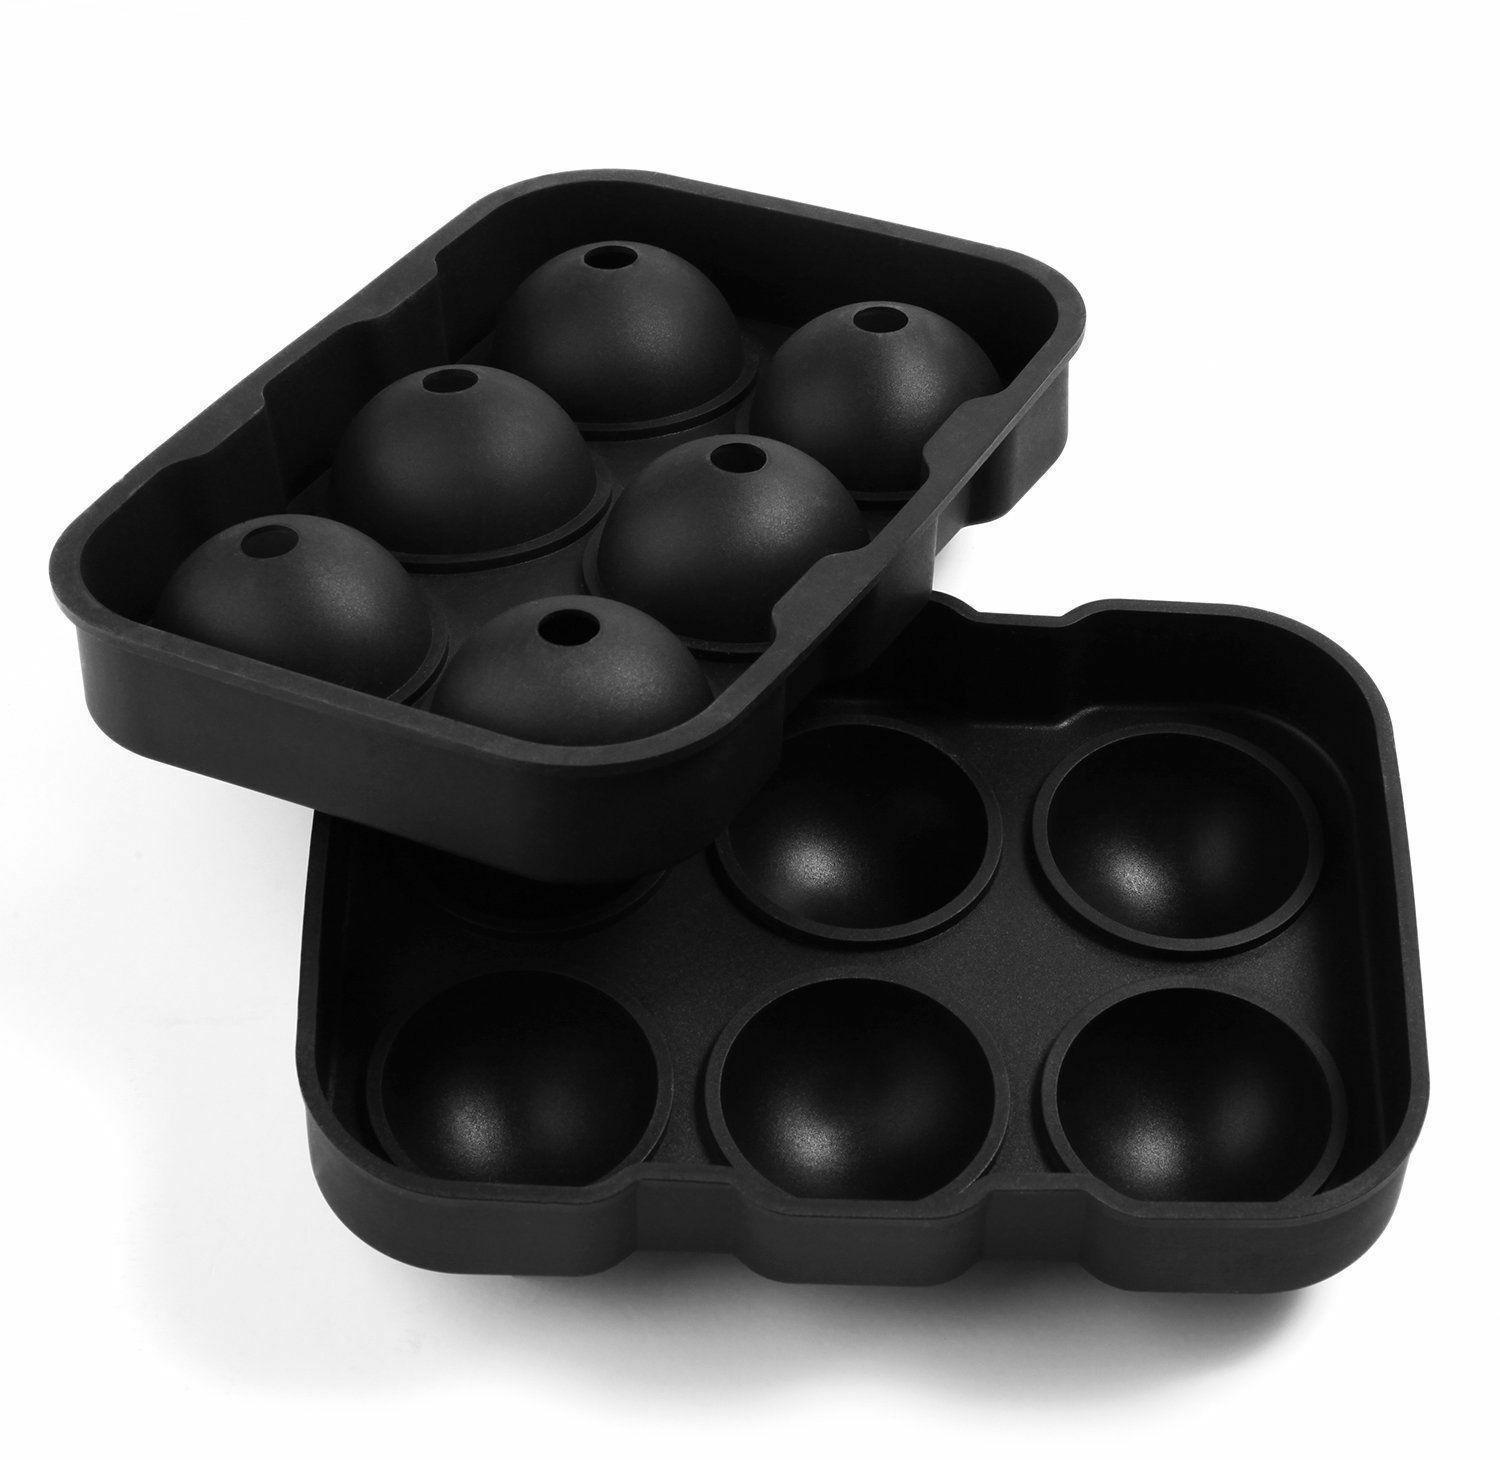 

Buckets And Coolers Round Ice Ball Maker Sphere Tray 6 Holes Sile Mold Cube For Cocktails Whiskey Black Pink Blue Uv00B 5Zthj